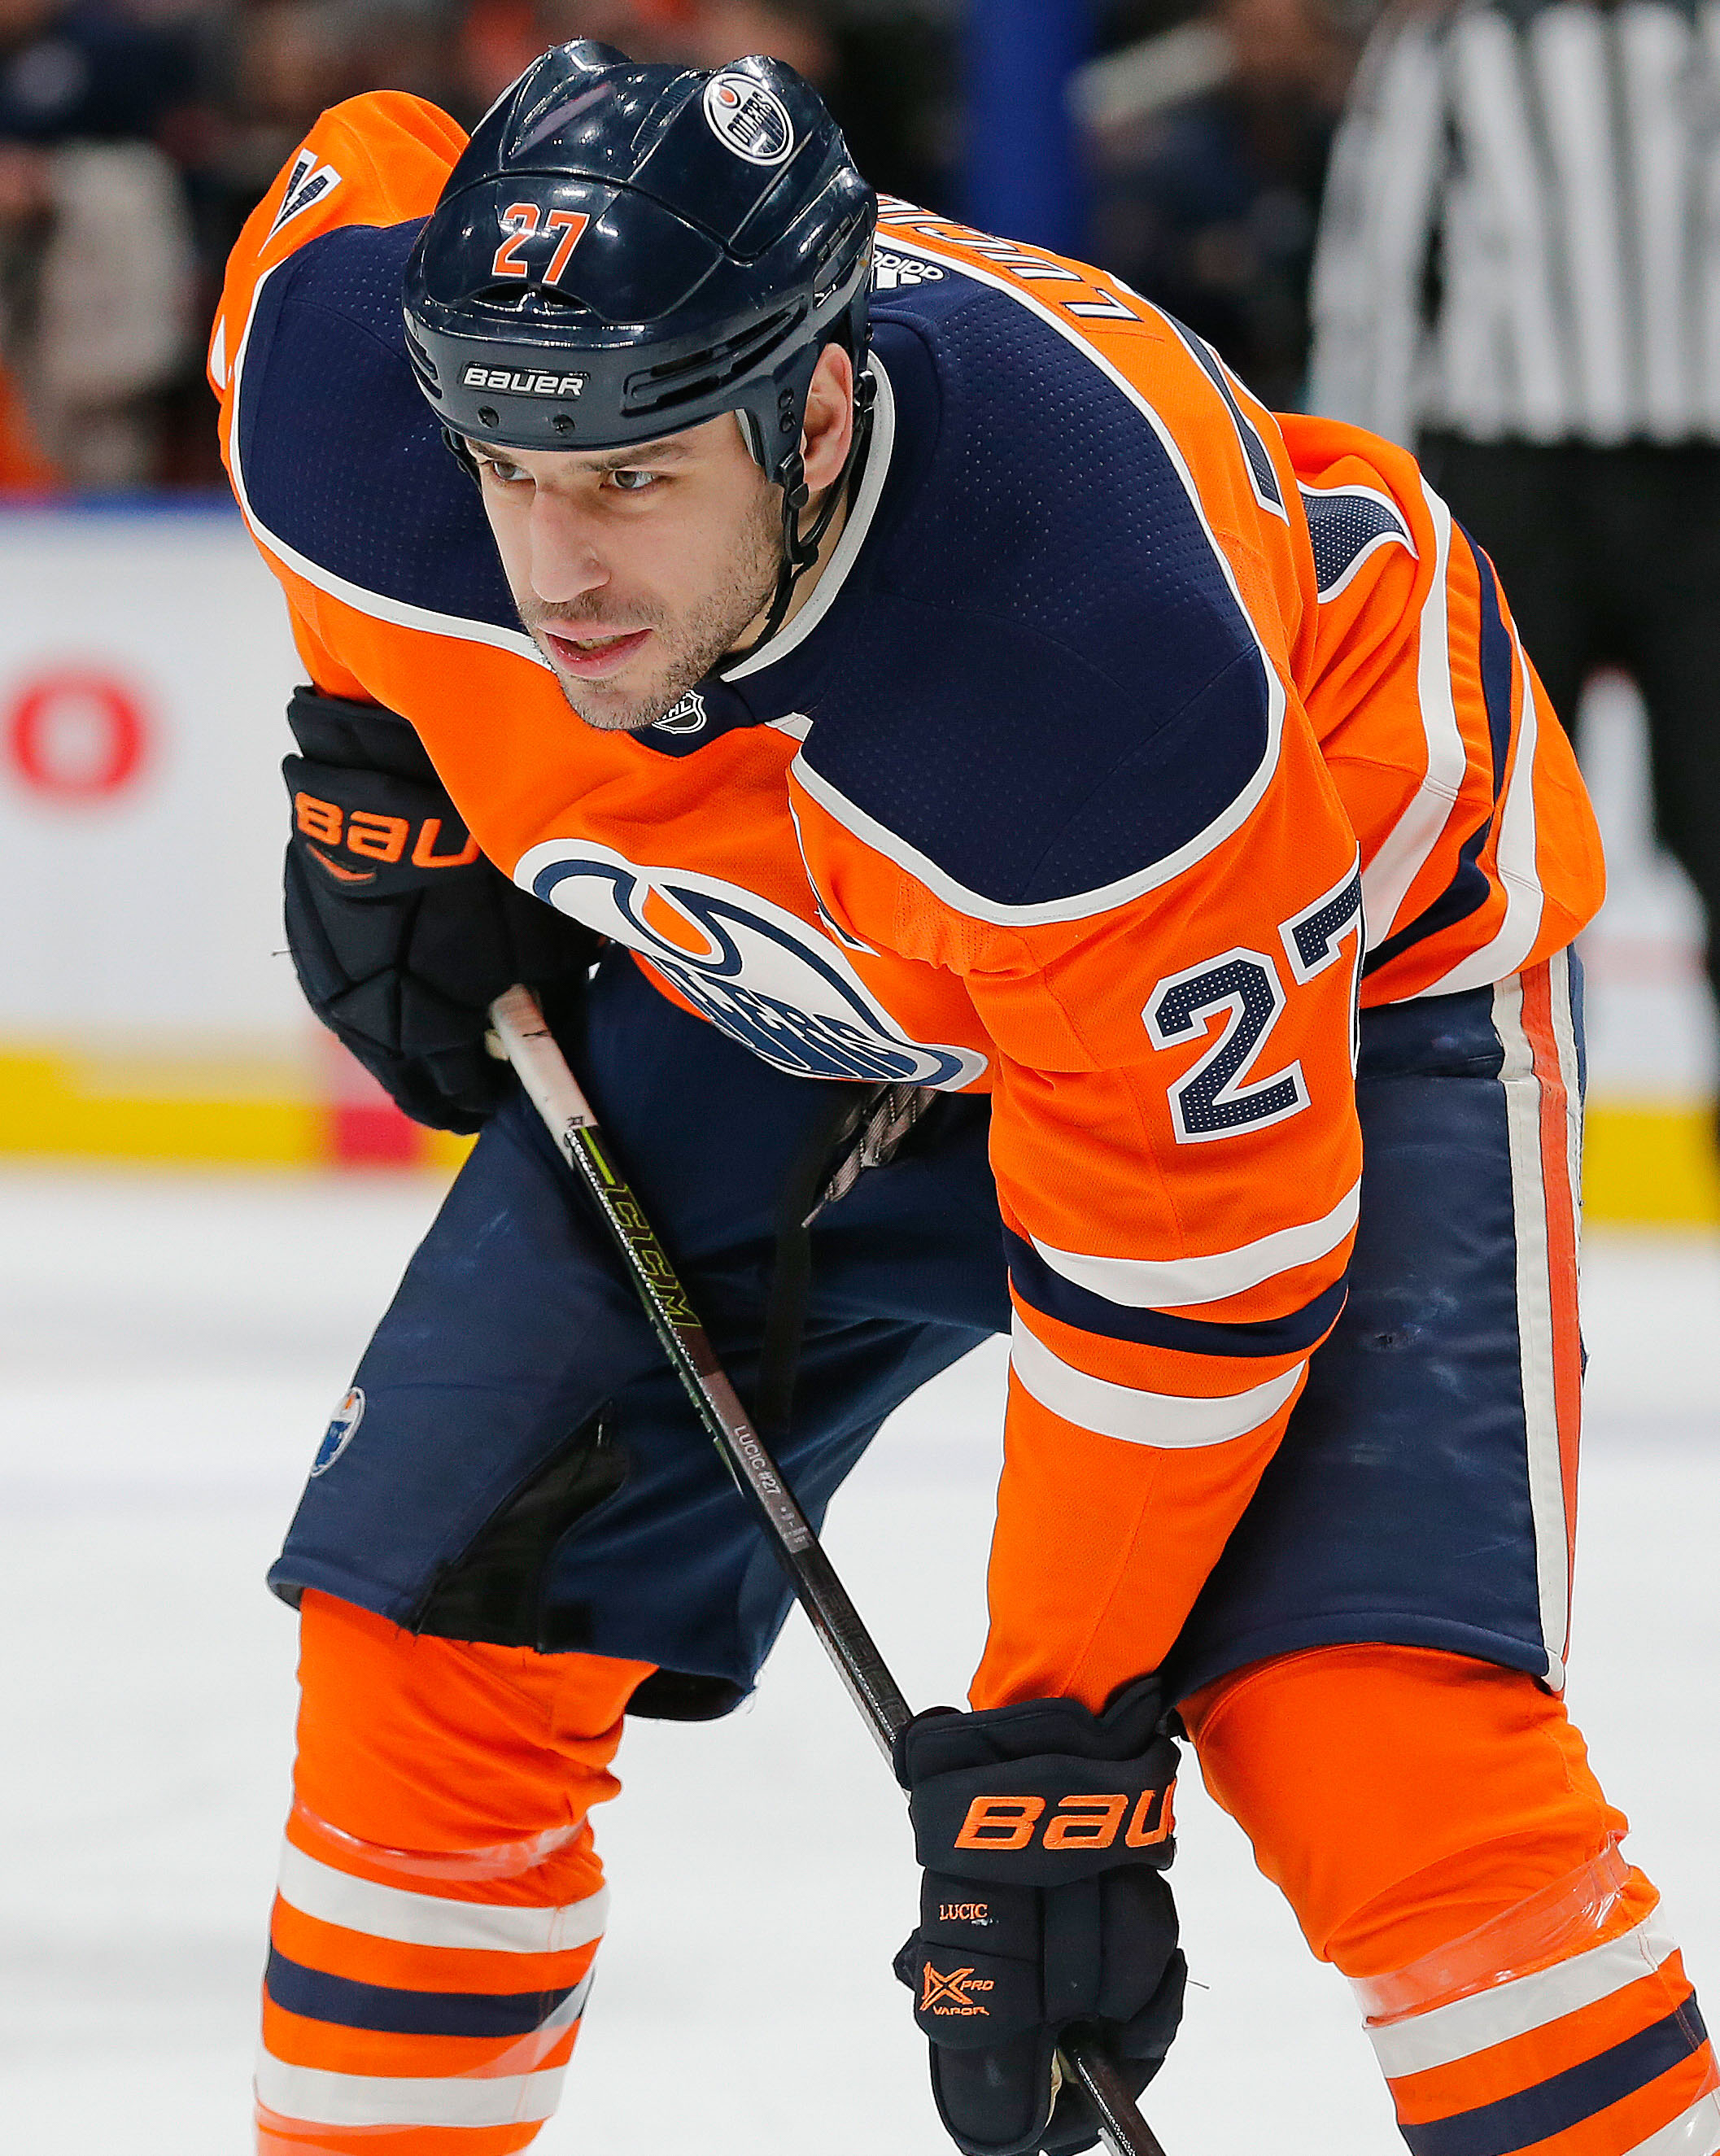 Can The Edmonton Oilers Trade Milan Lucic This Summer? - NHL Rumors